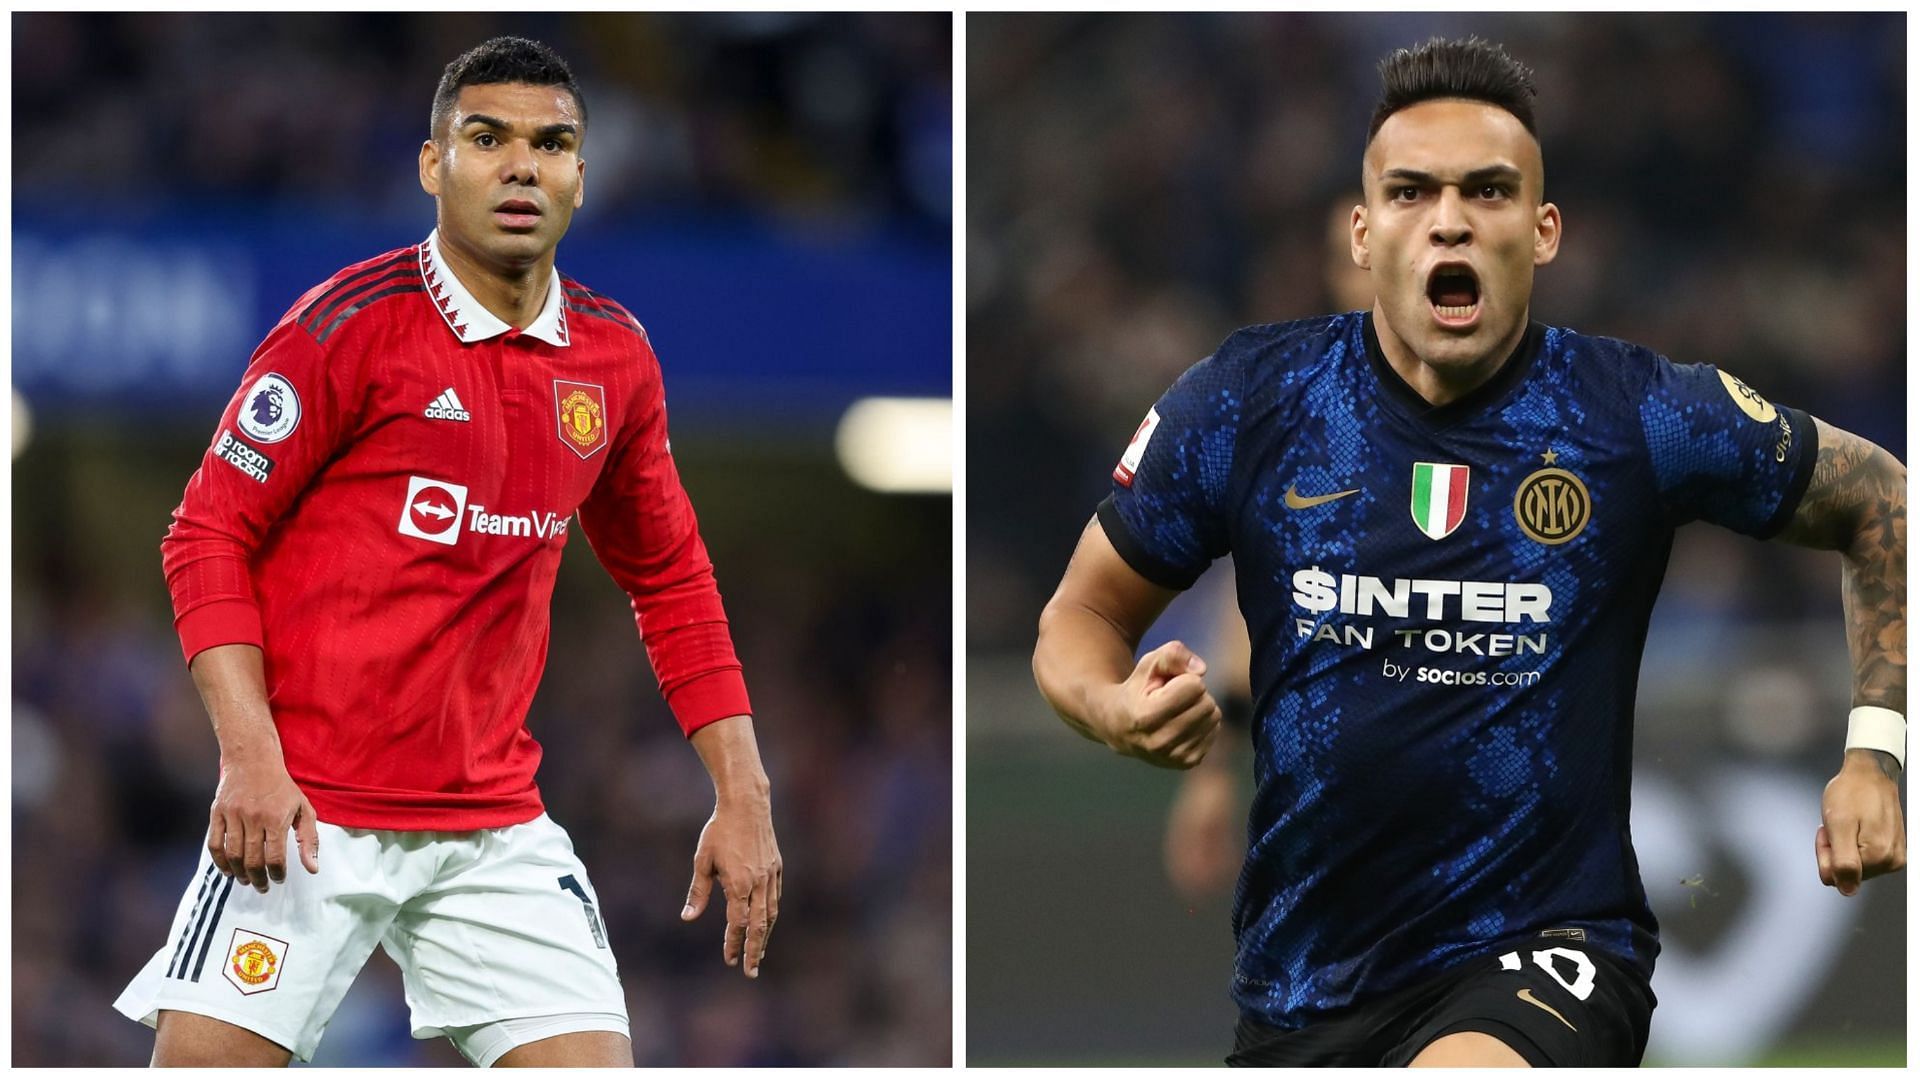 Casemiro and Lautaro Martinez had an impressive showing for their clubs (Images via Getty)